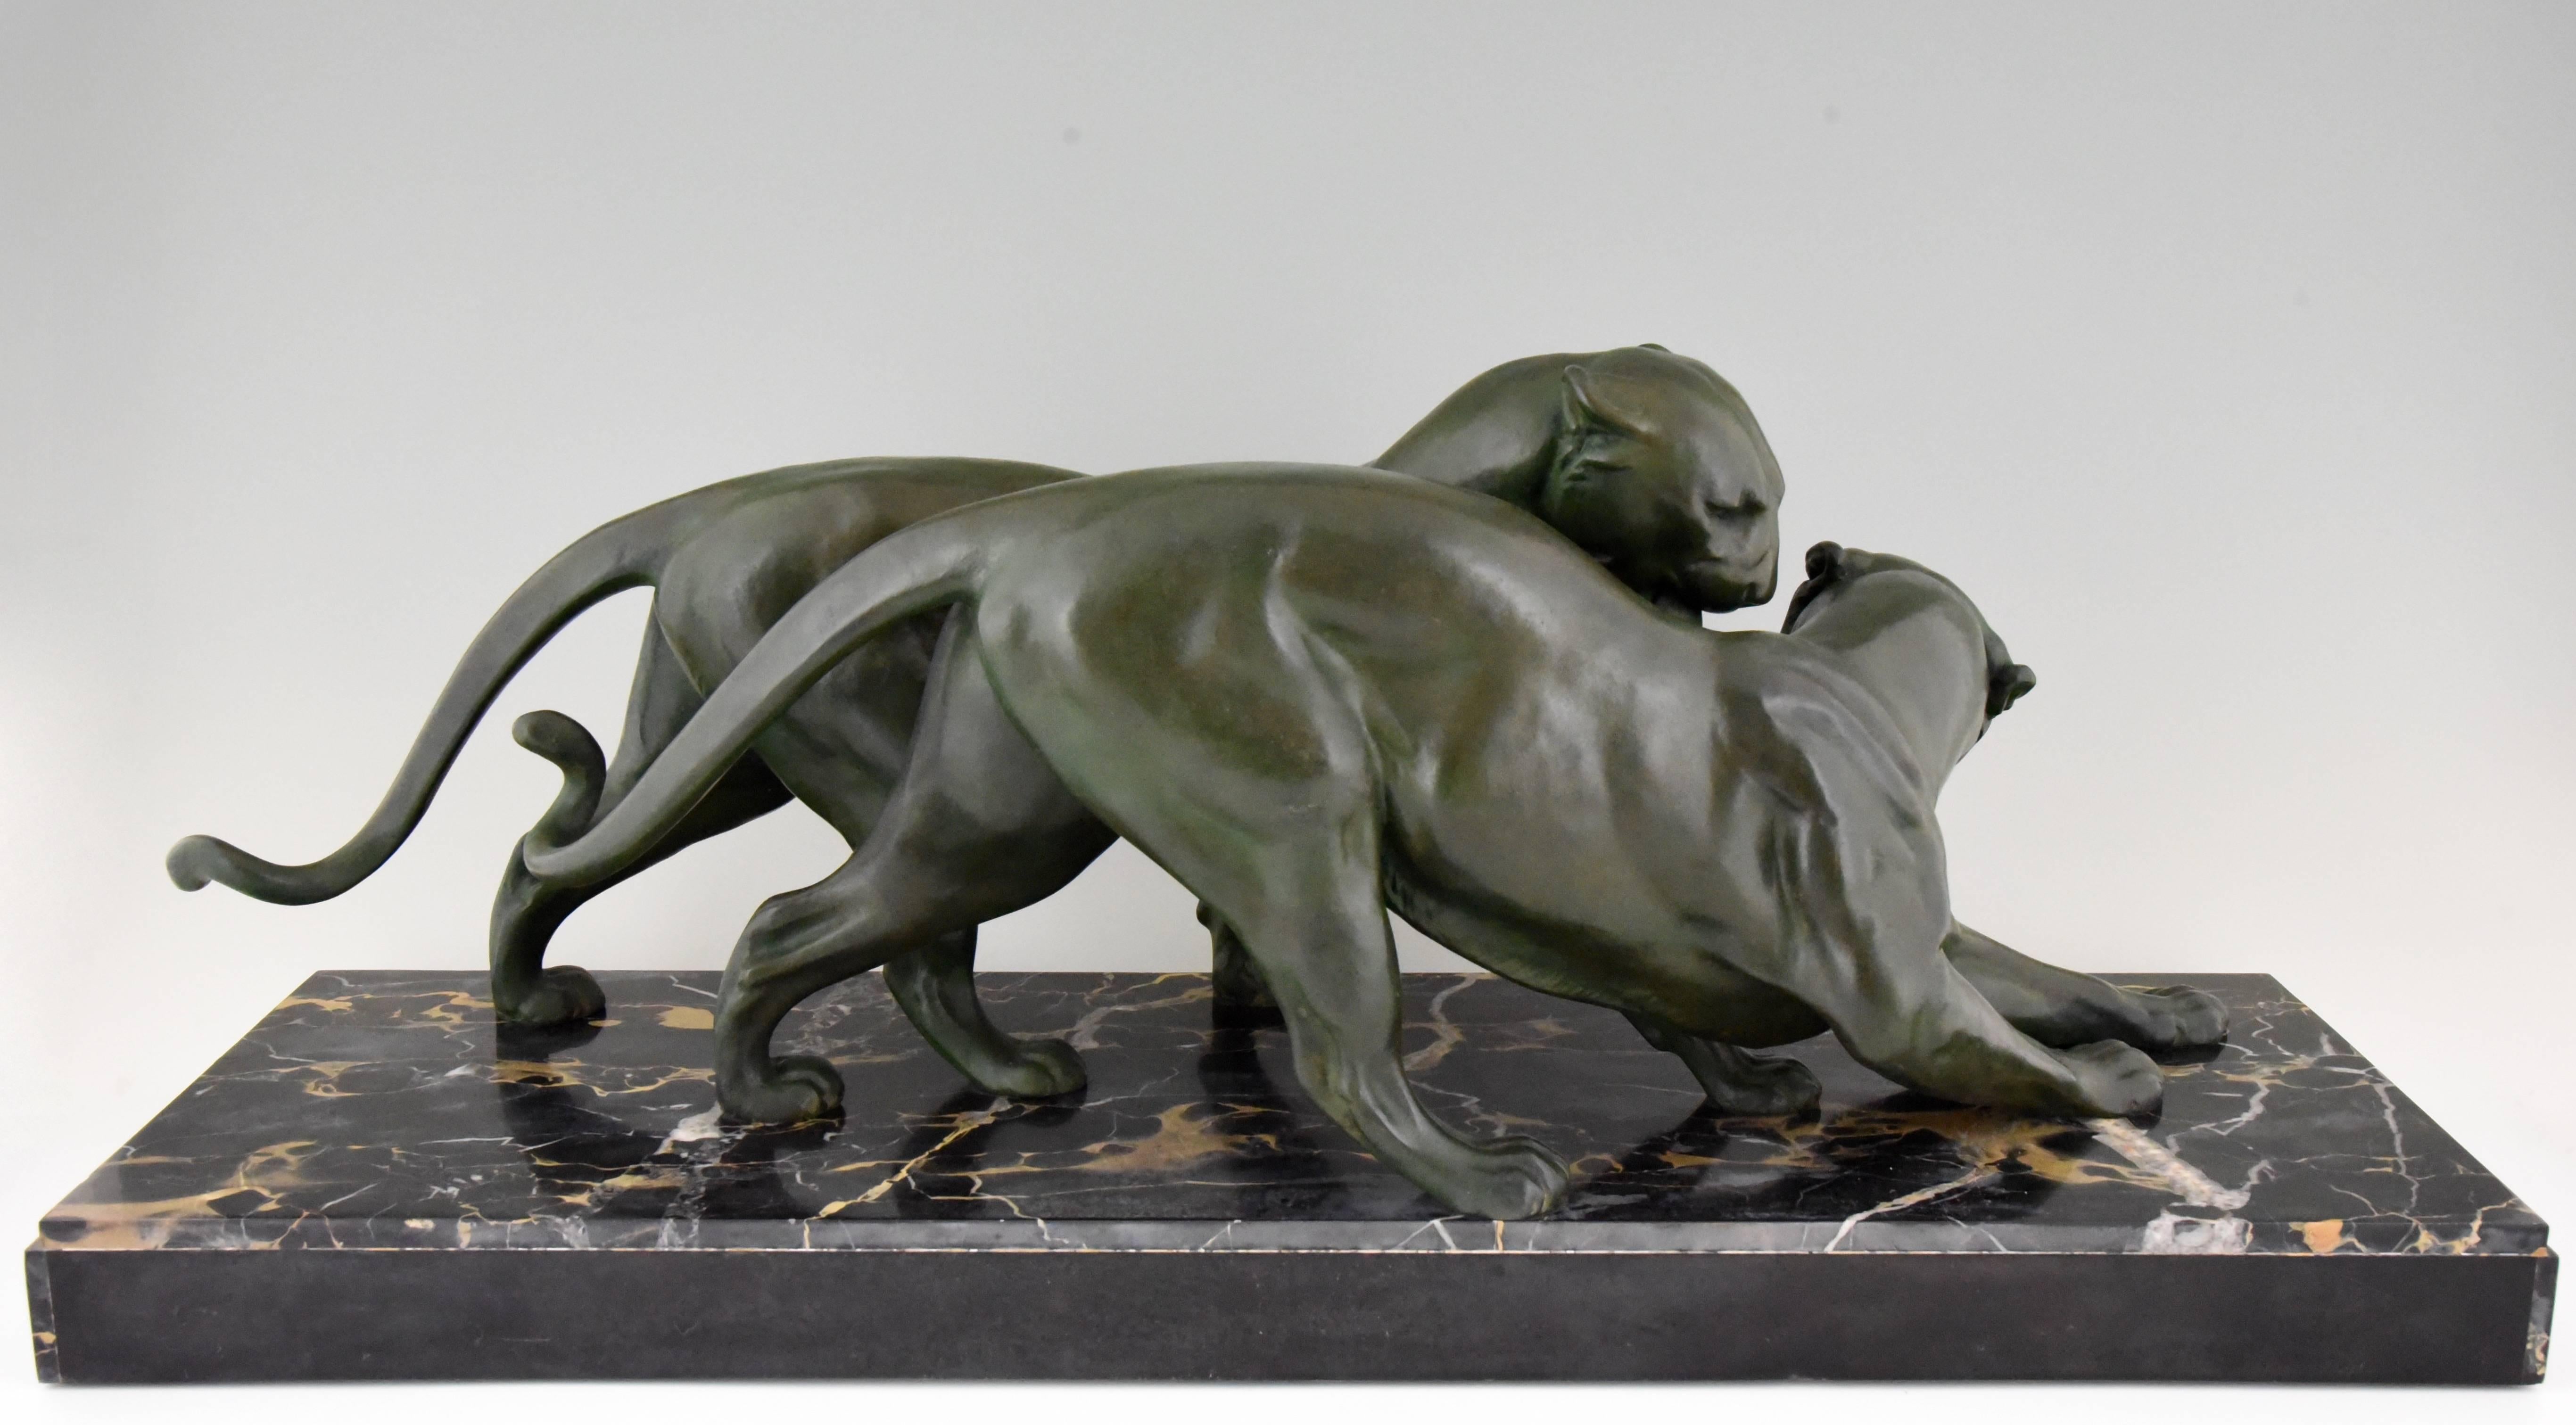 20th Century Art Deco Sculpture of Two Panthers by Plagnet, 1930 France